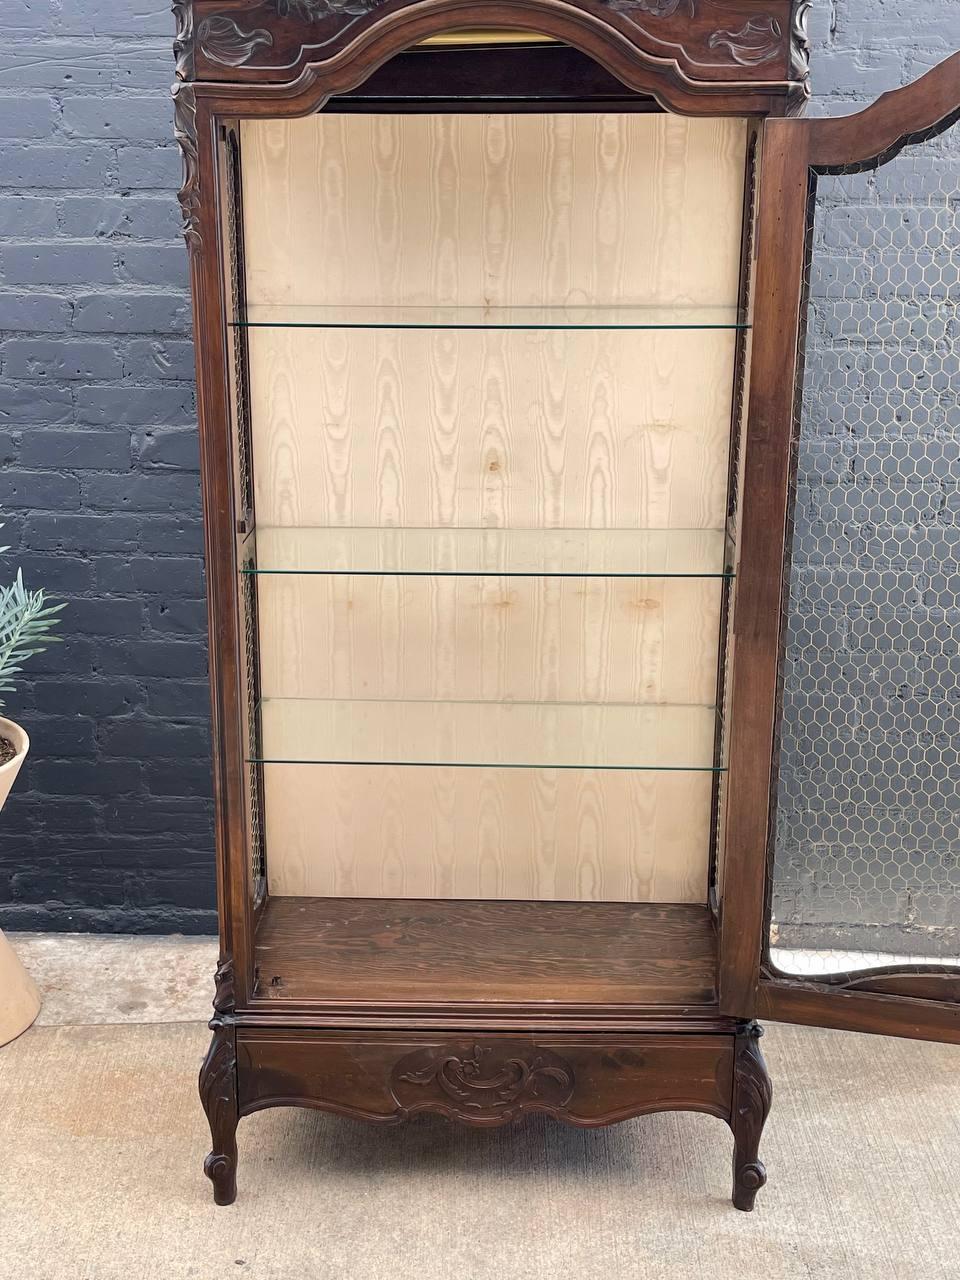 Mid-20th Century Antique French Louis XVI Armoire Display Shelf Cabinet For Sale